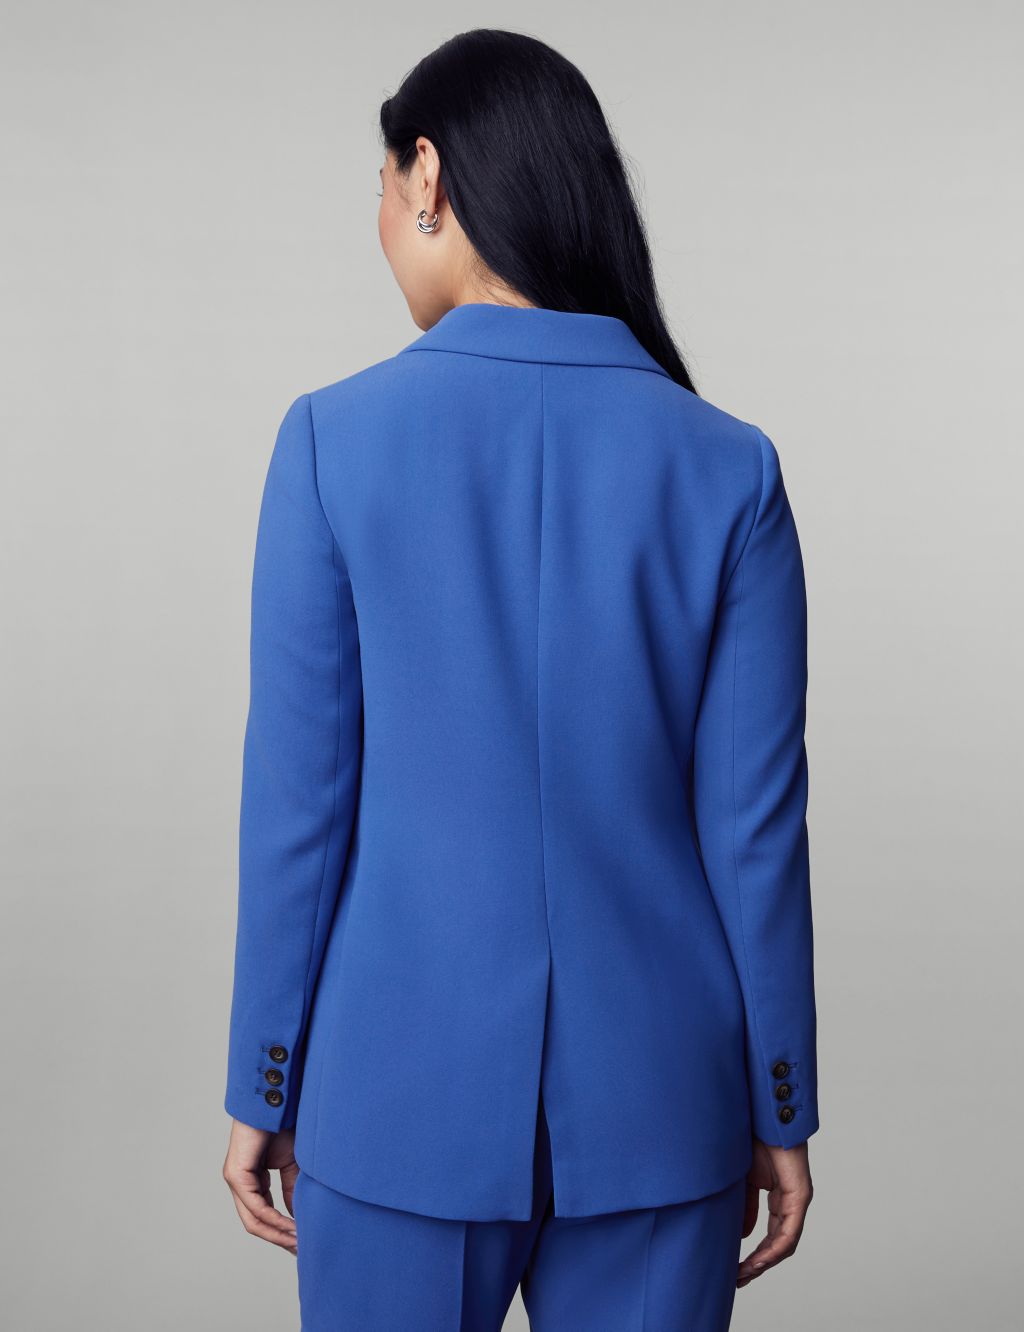 Crepe Tailored Single Breasted Blazer image 5